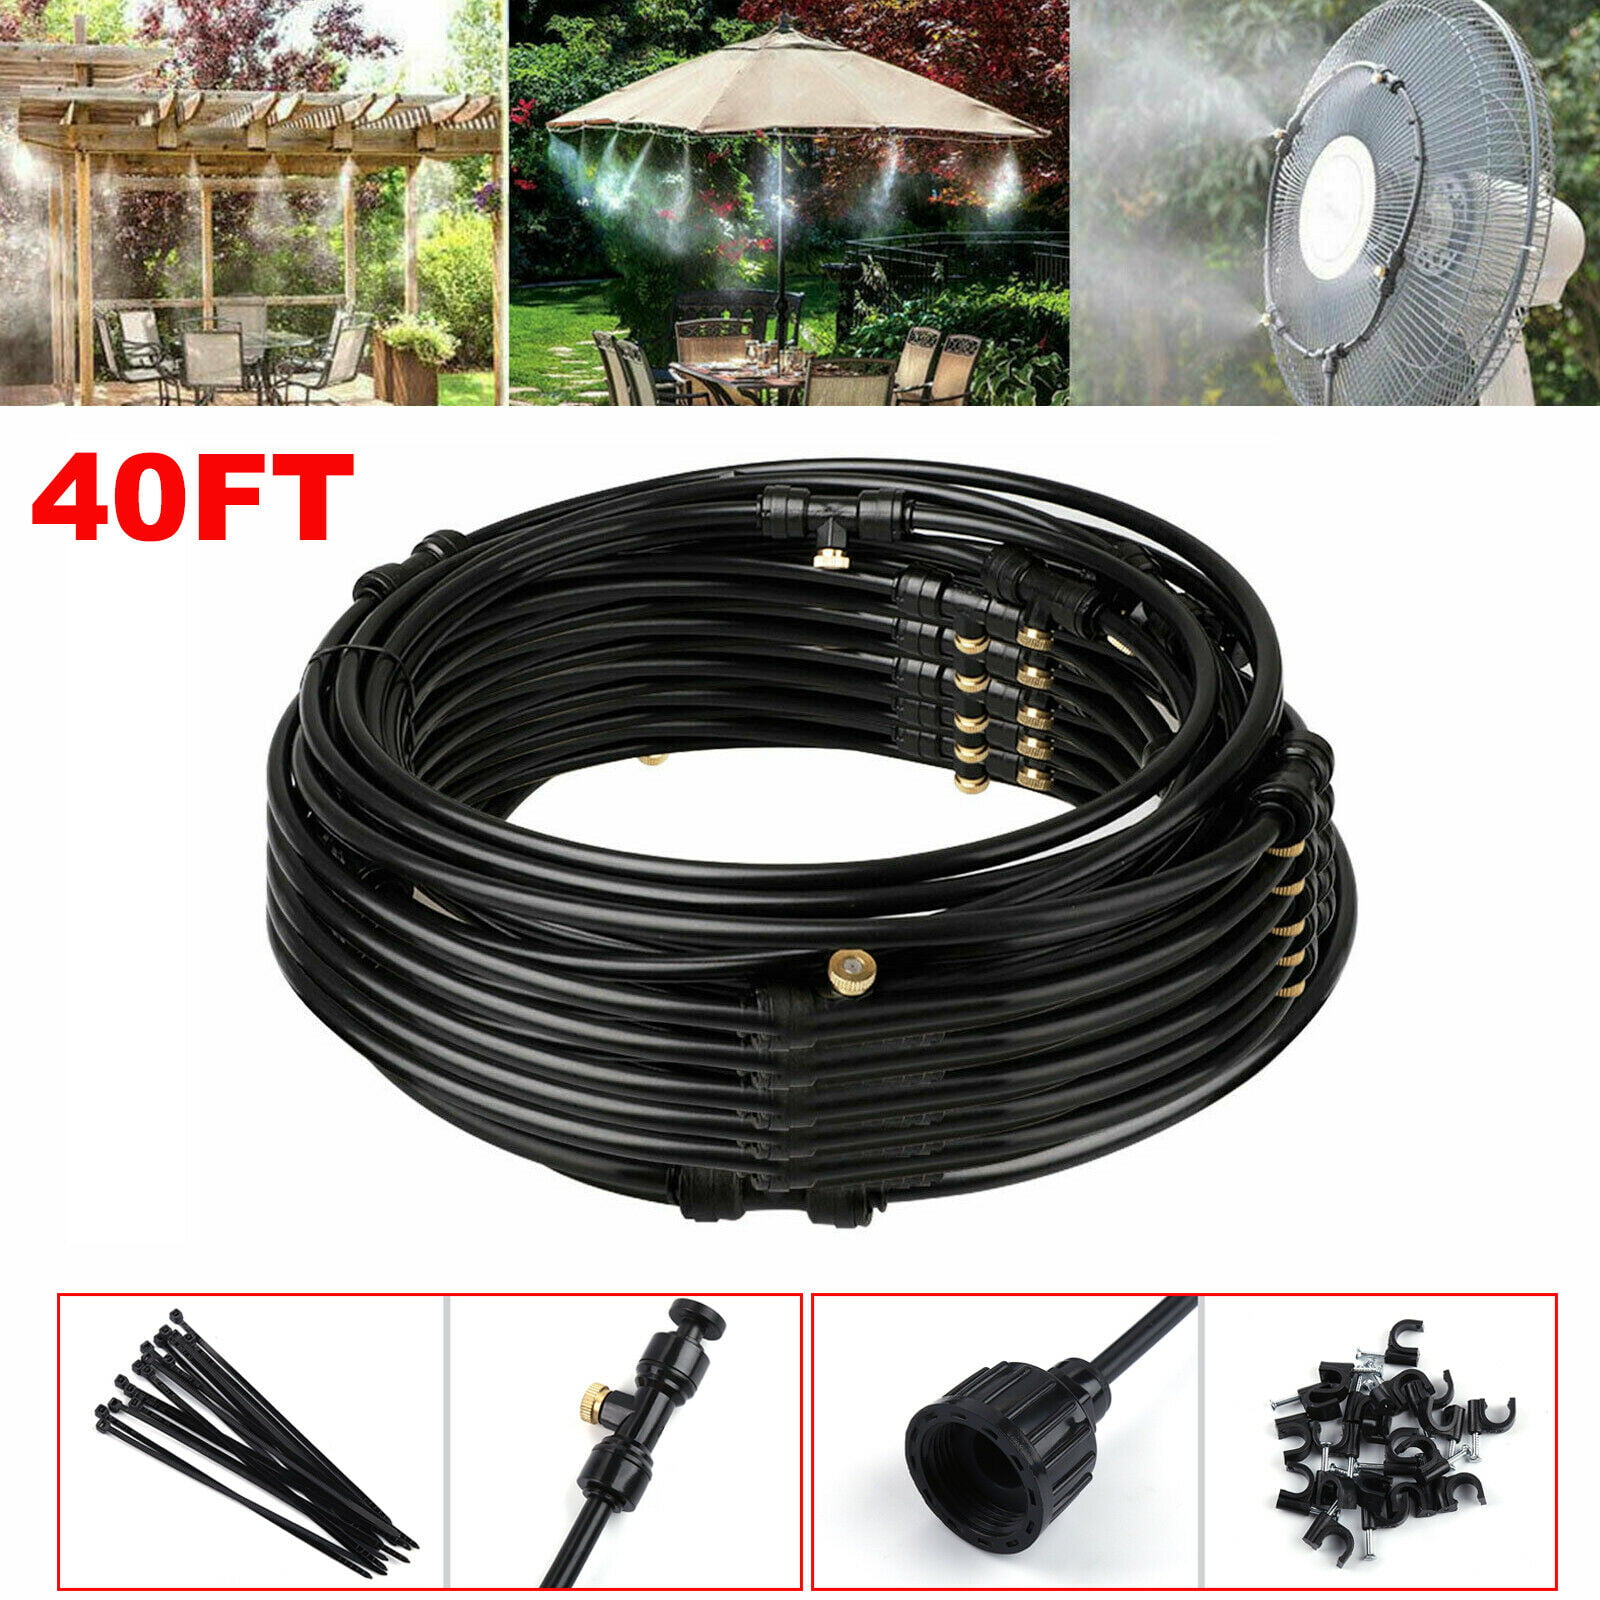 Details about   Outdoor Misting Cooling System Garden Irrigation Water Mister Nozzles Set 